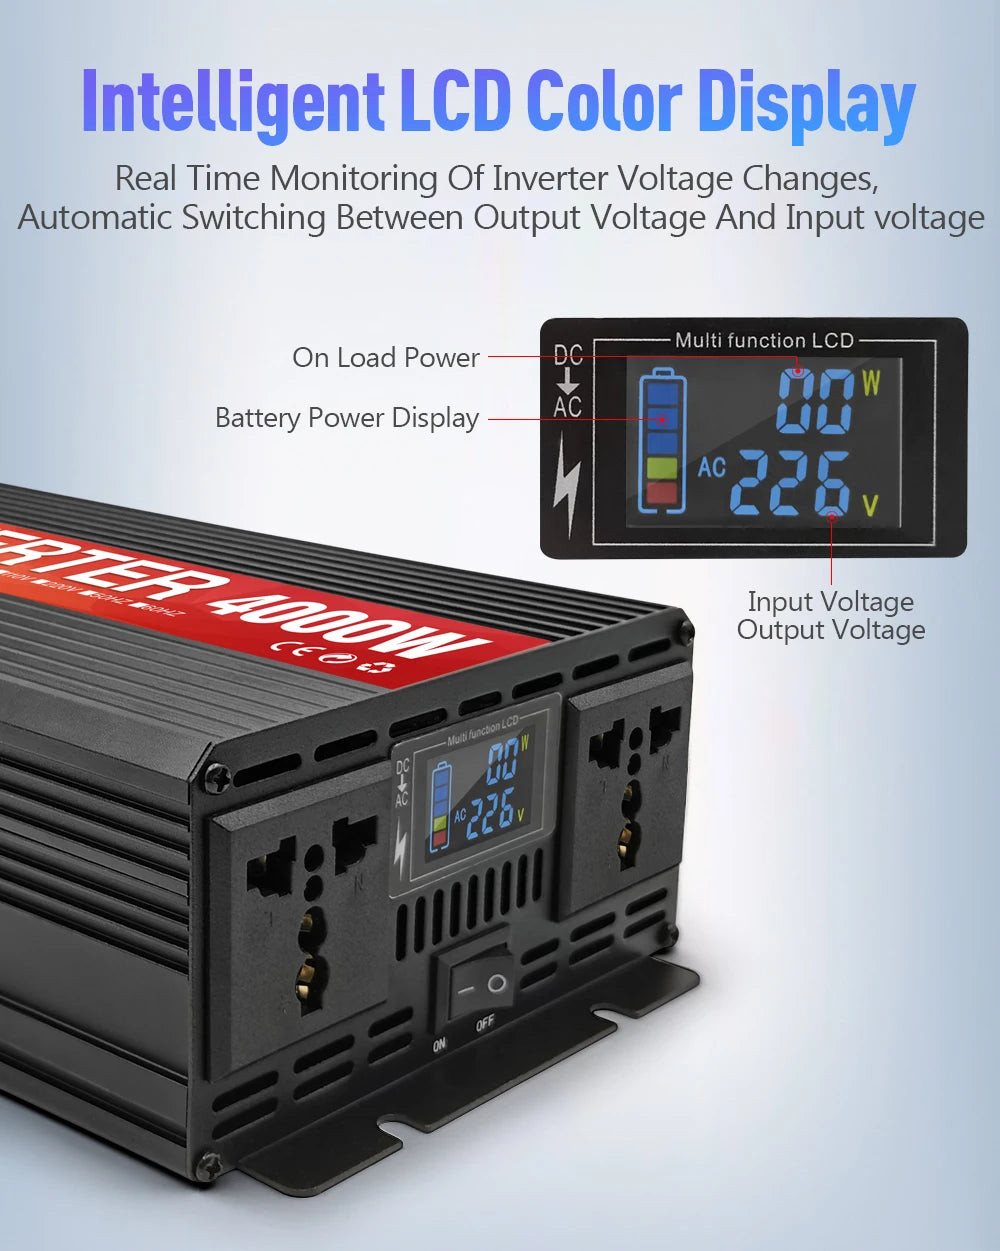 LED 3000W Pure Sine Wave Inverter, Pure sine wave inverter converts 12V DC to 220V AC, suitable for off-grid solar power systems.